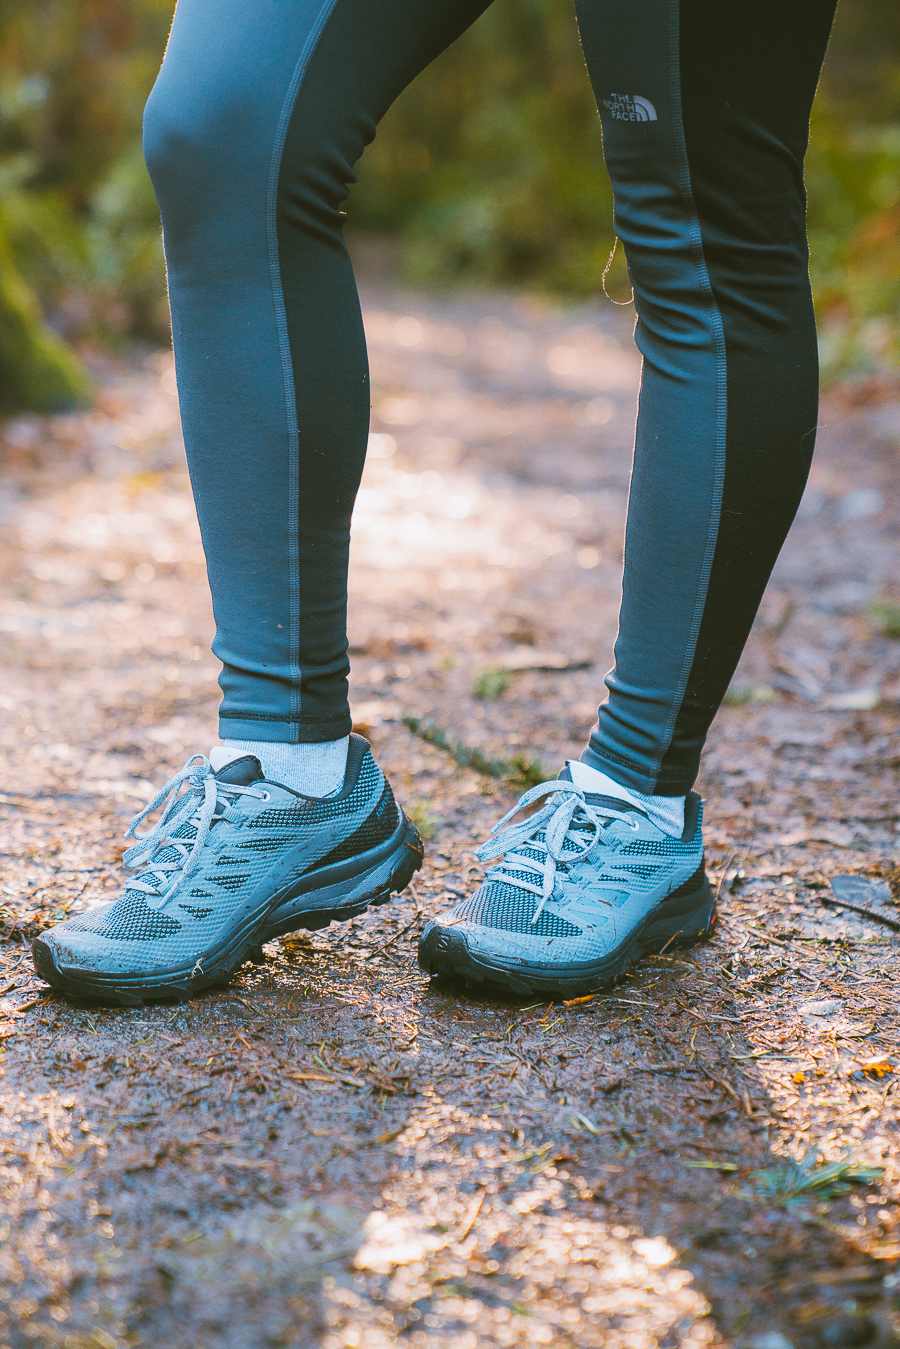 20 New Ideas on How to Wear Hiking Boots for Women — JOYFULLY GREEN